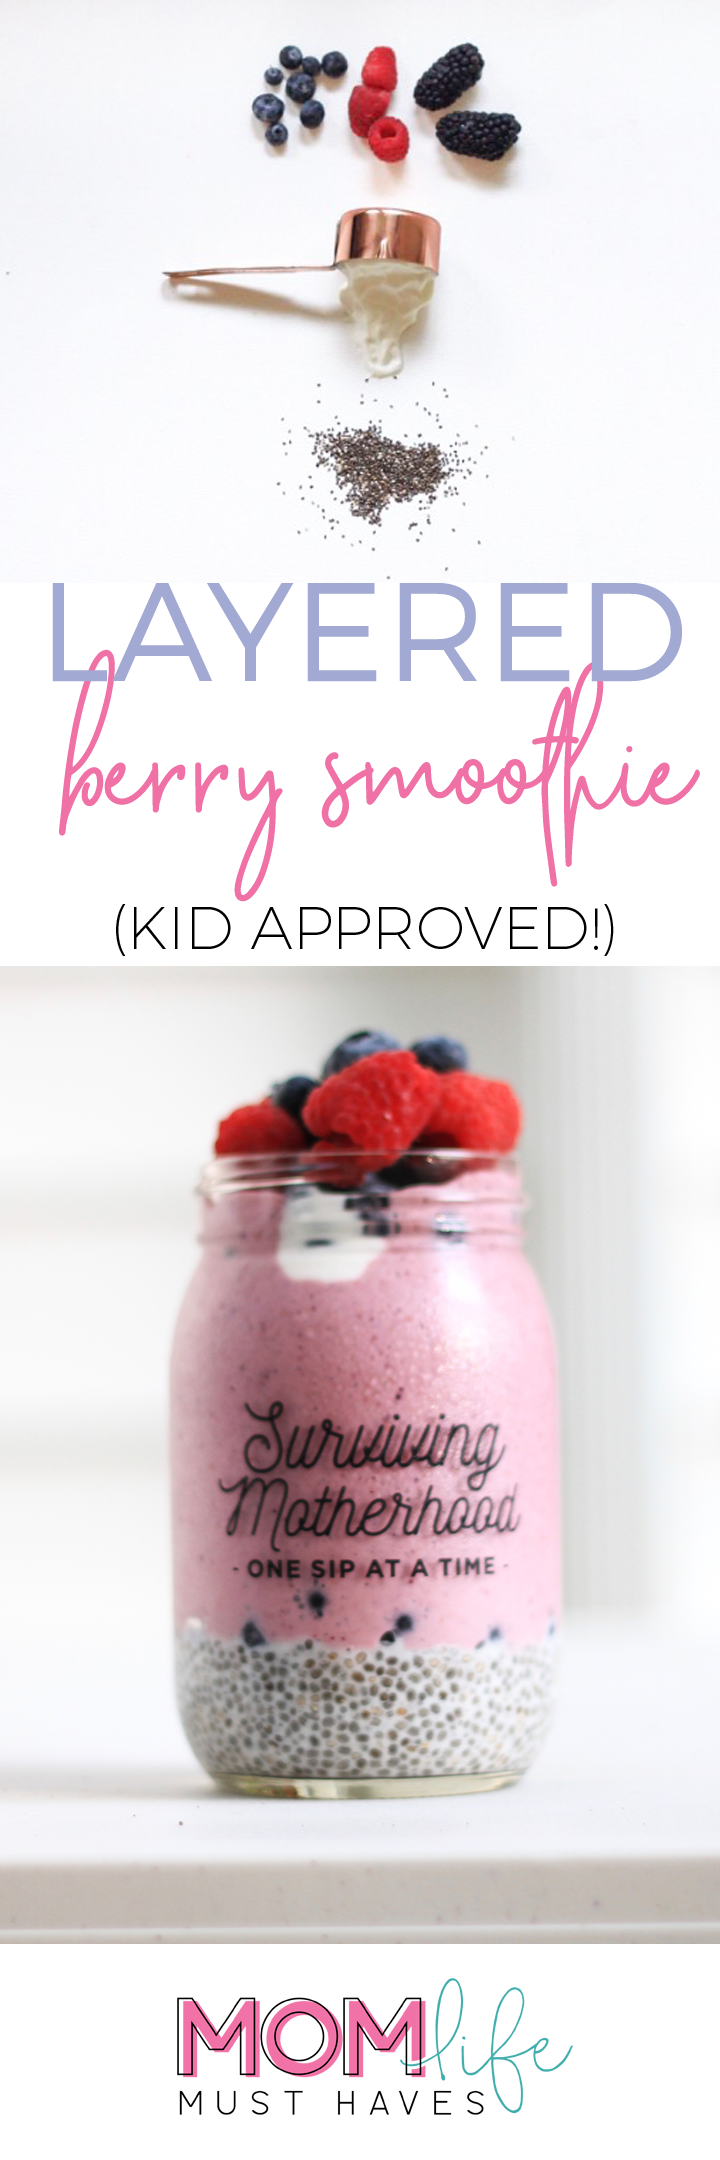 Layered berry smoothie recipe, easy smoothie ideas for kids from Mom Life Must Haves! momlifemusthaves.com